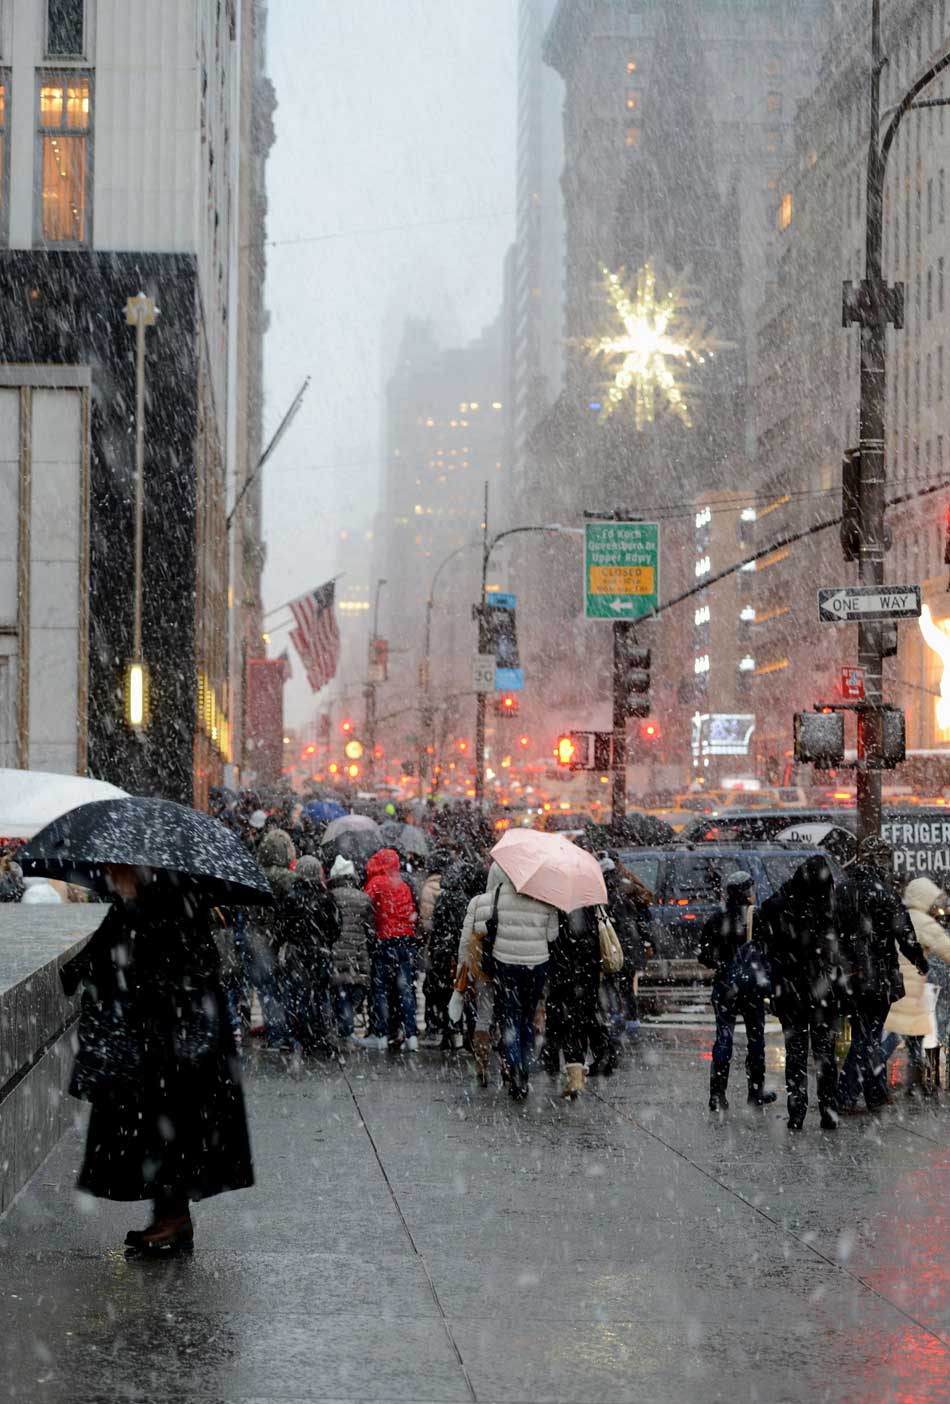 People walk through the Fifth Avenue in heavy snow in New York, U.S., Dec. 26, 2012. According to American National Weather Service, a strong snowstorm was moving from the south to the east, which caused flights delay and traffic block in New York, Ohio and several east west cities. (Xinhua/Wang Lei)